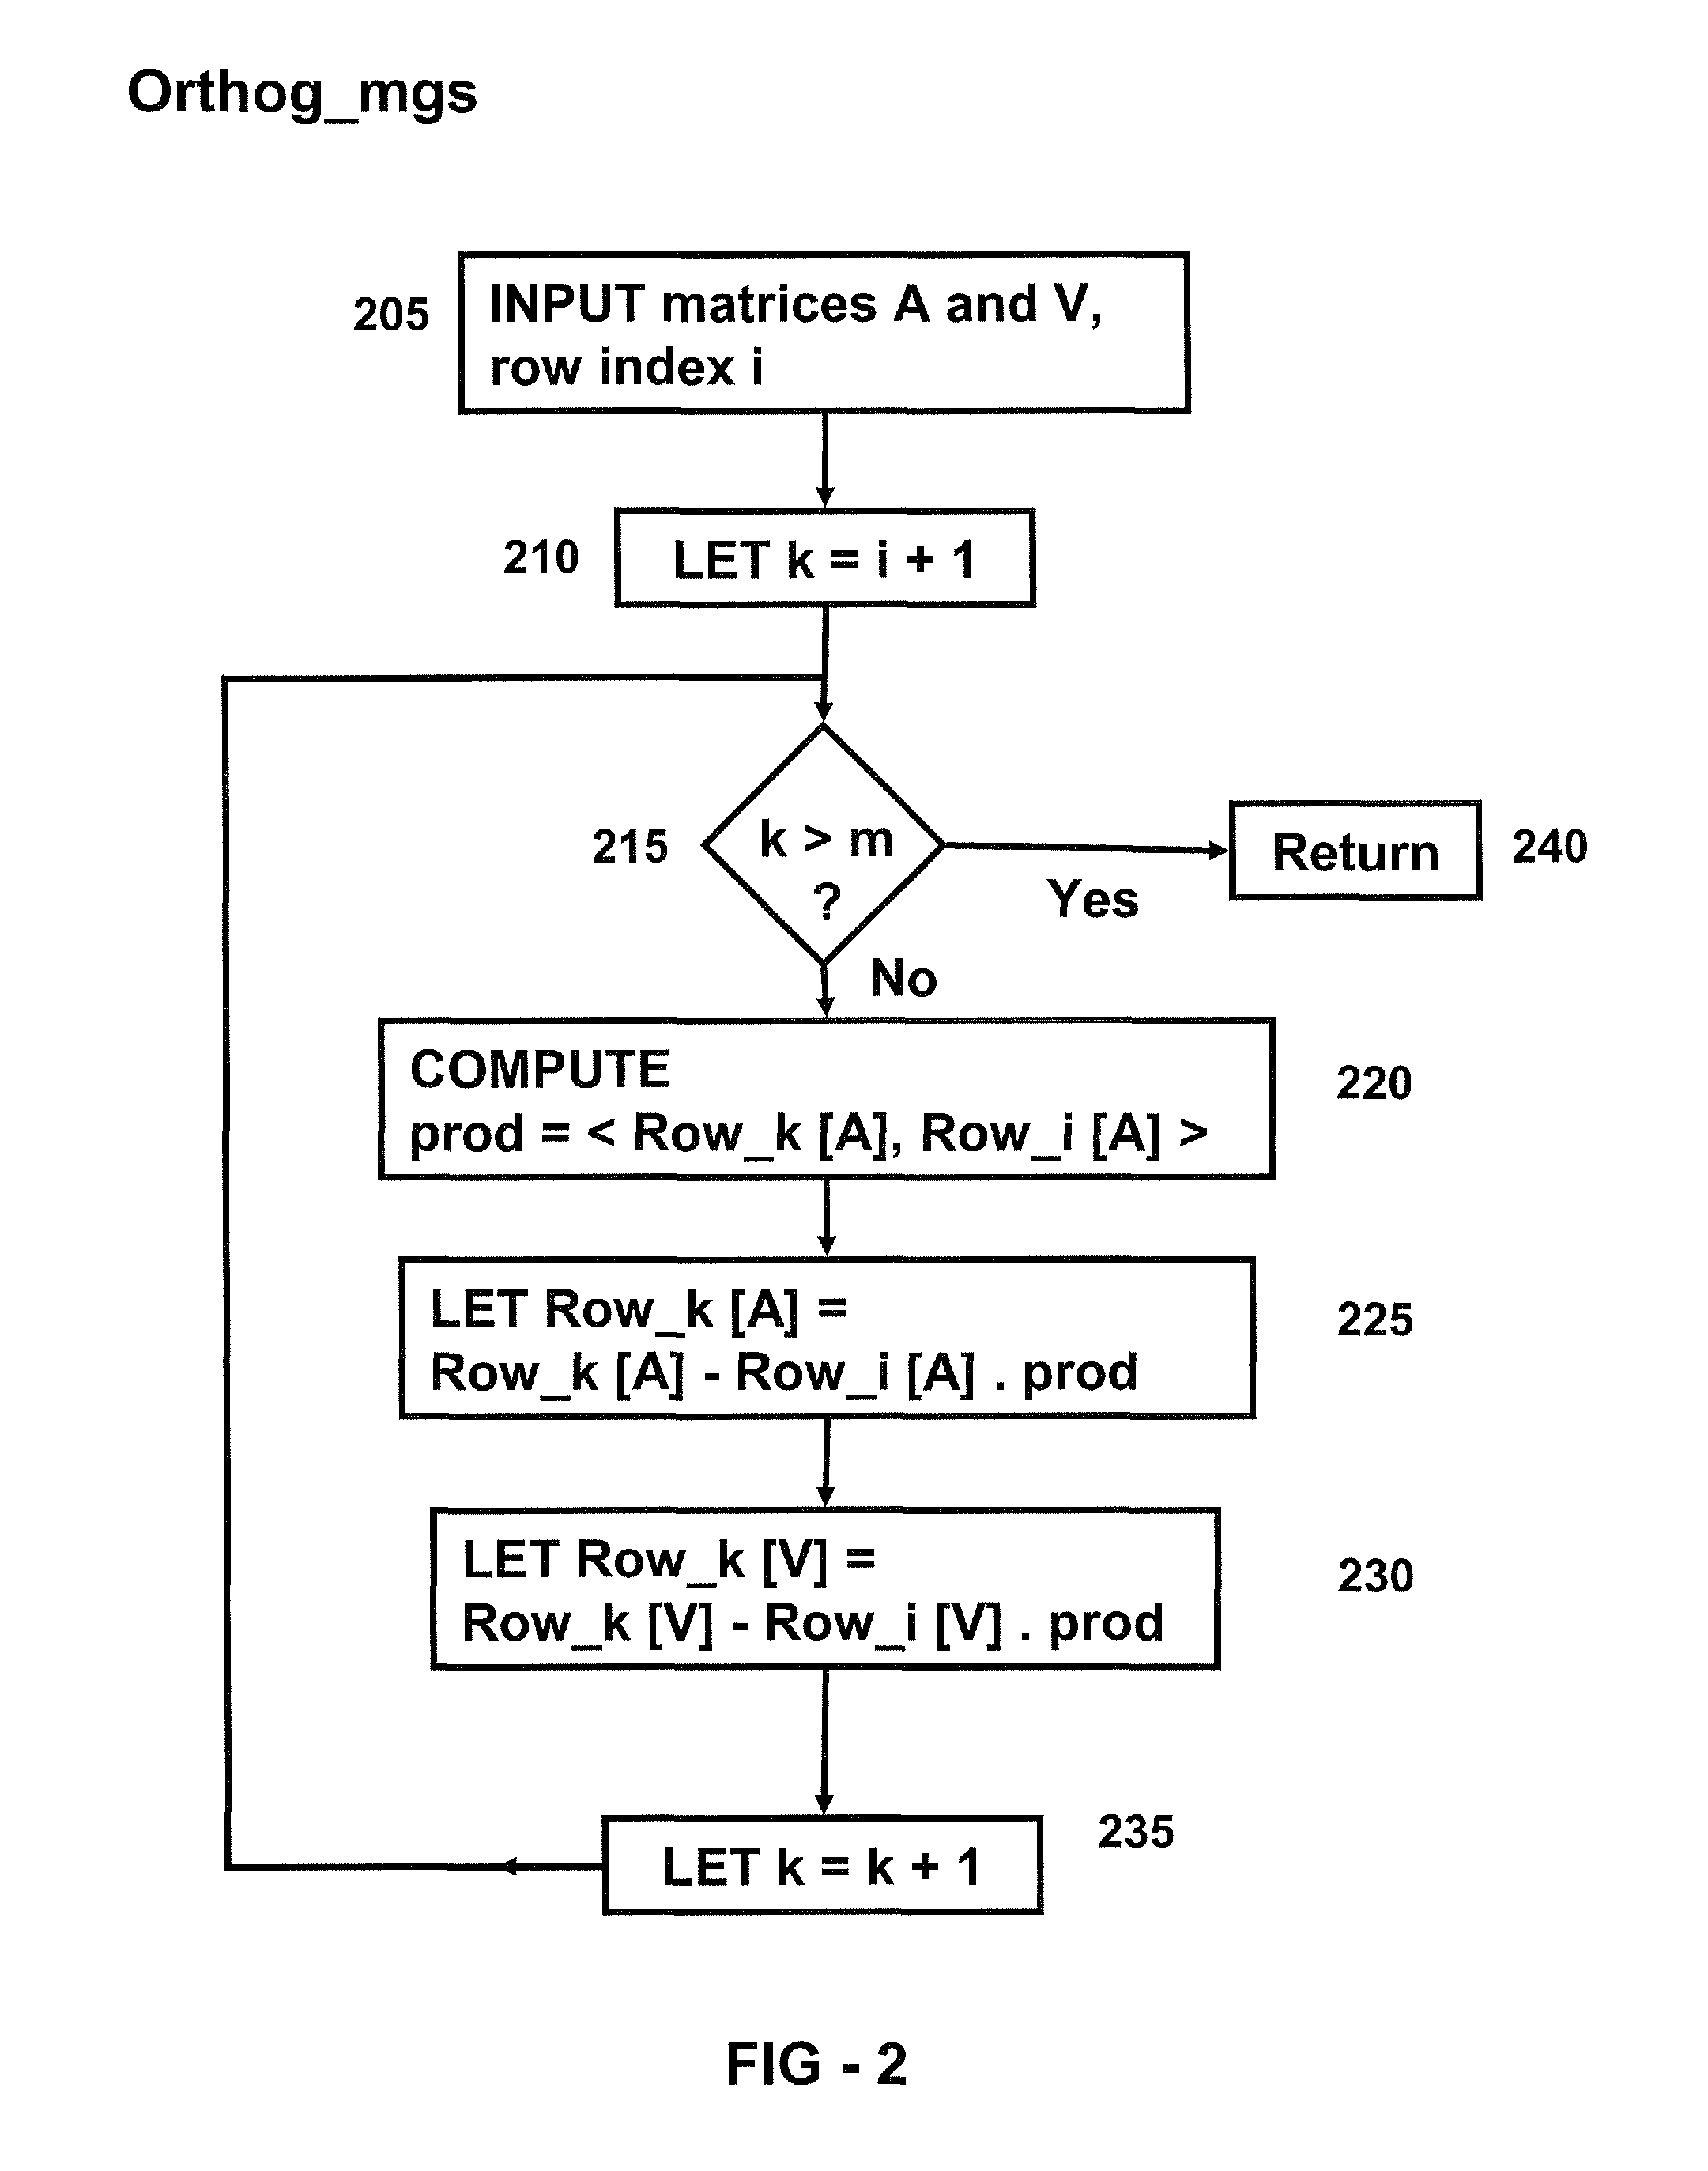 Systems and methods for reducing memory traffic and power consumption in a processing environment by solving a system of linear equations